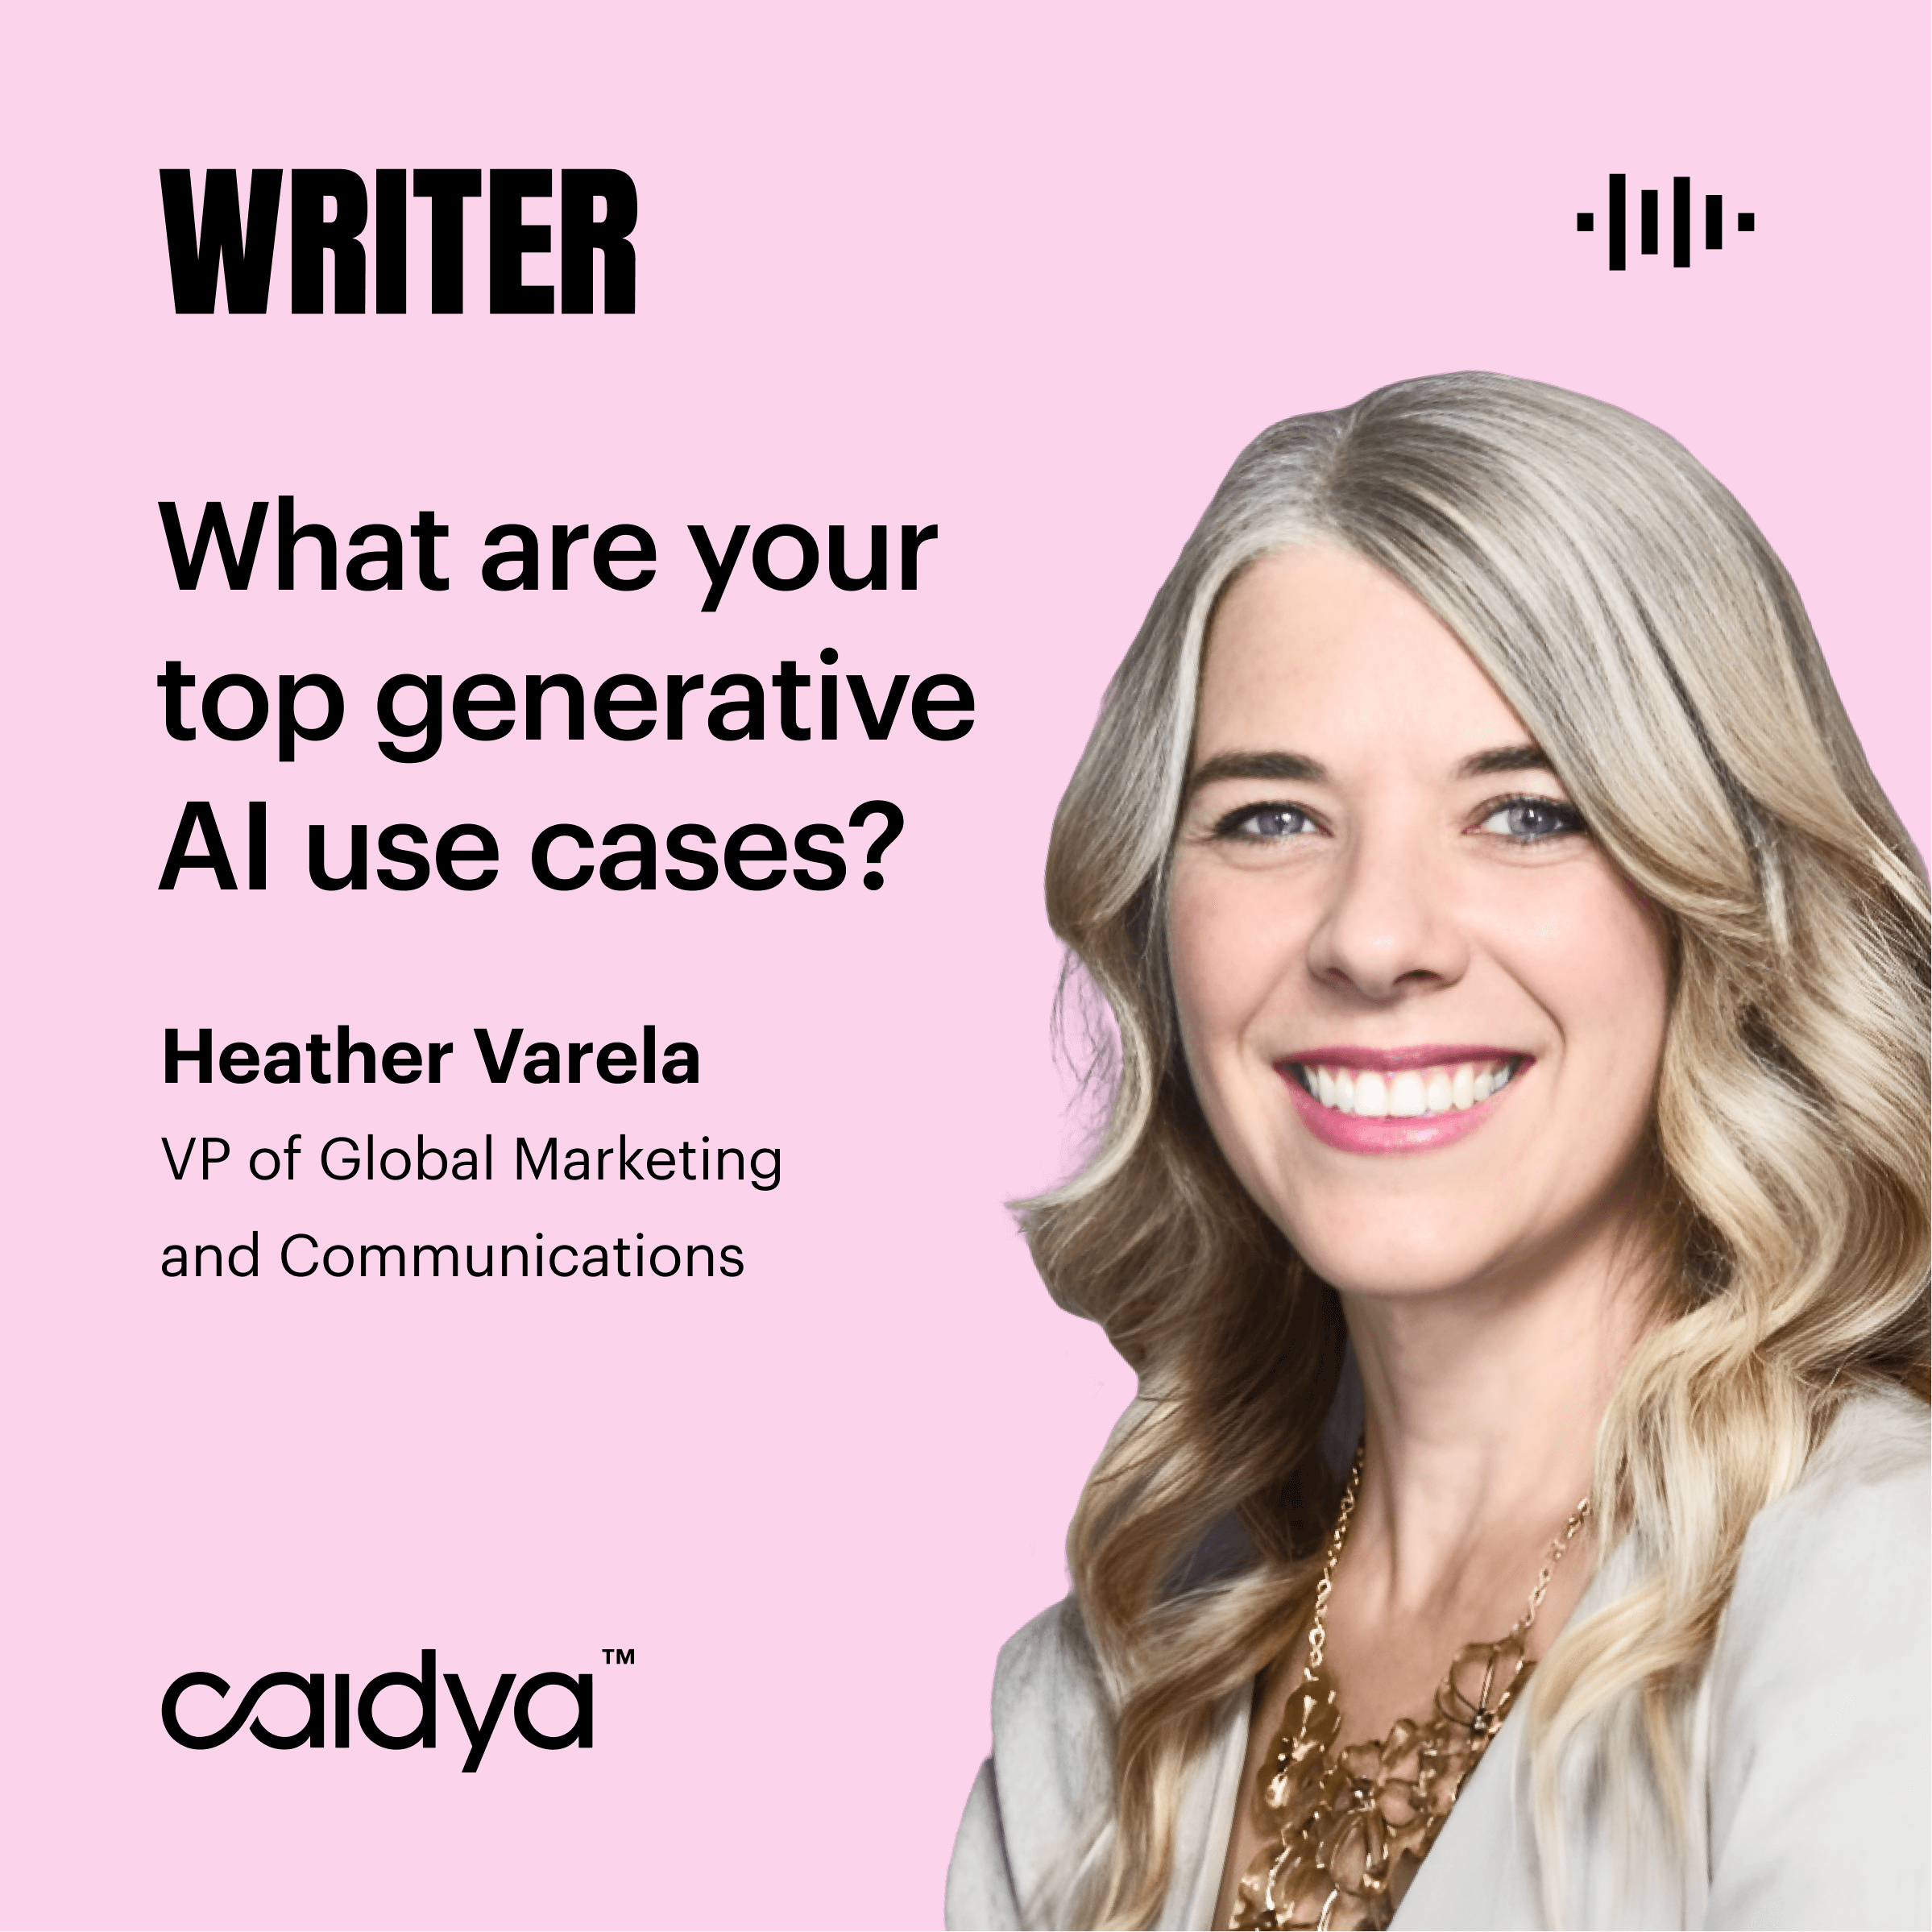 What are your top generative AI use cases?